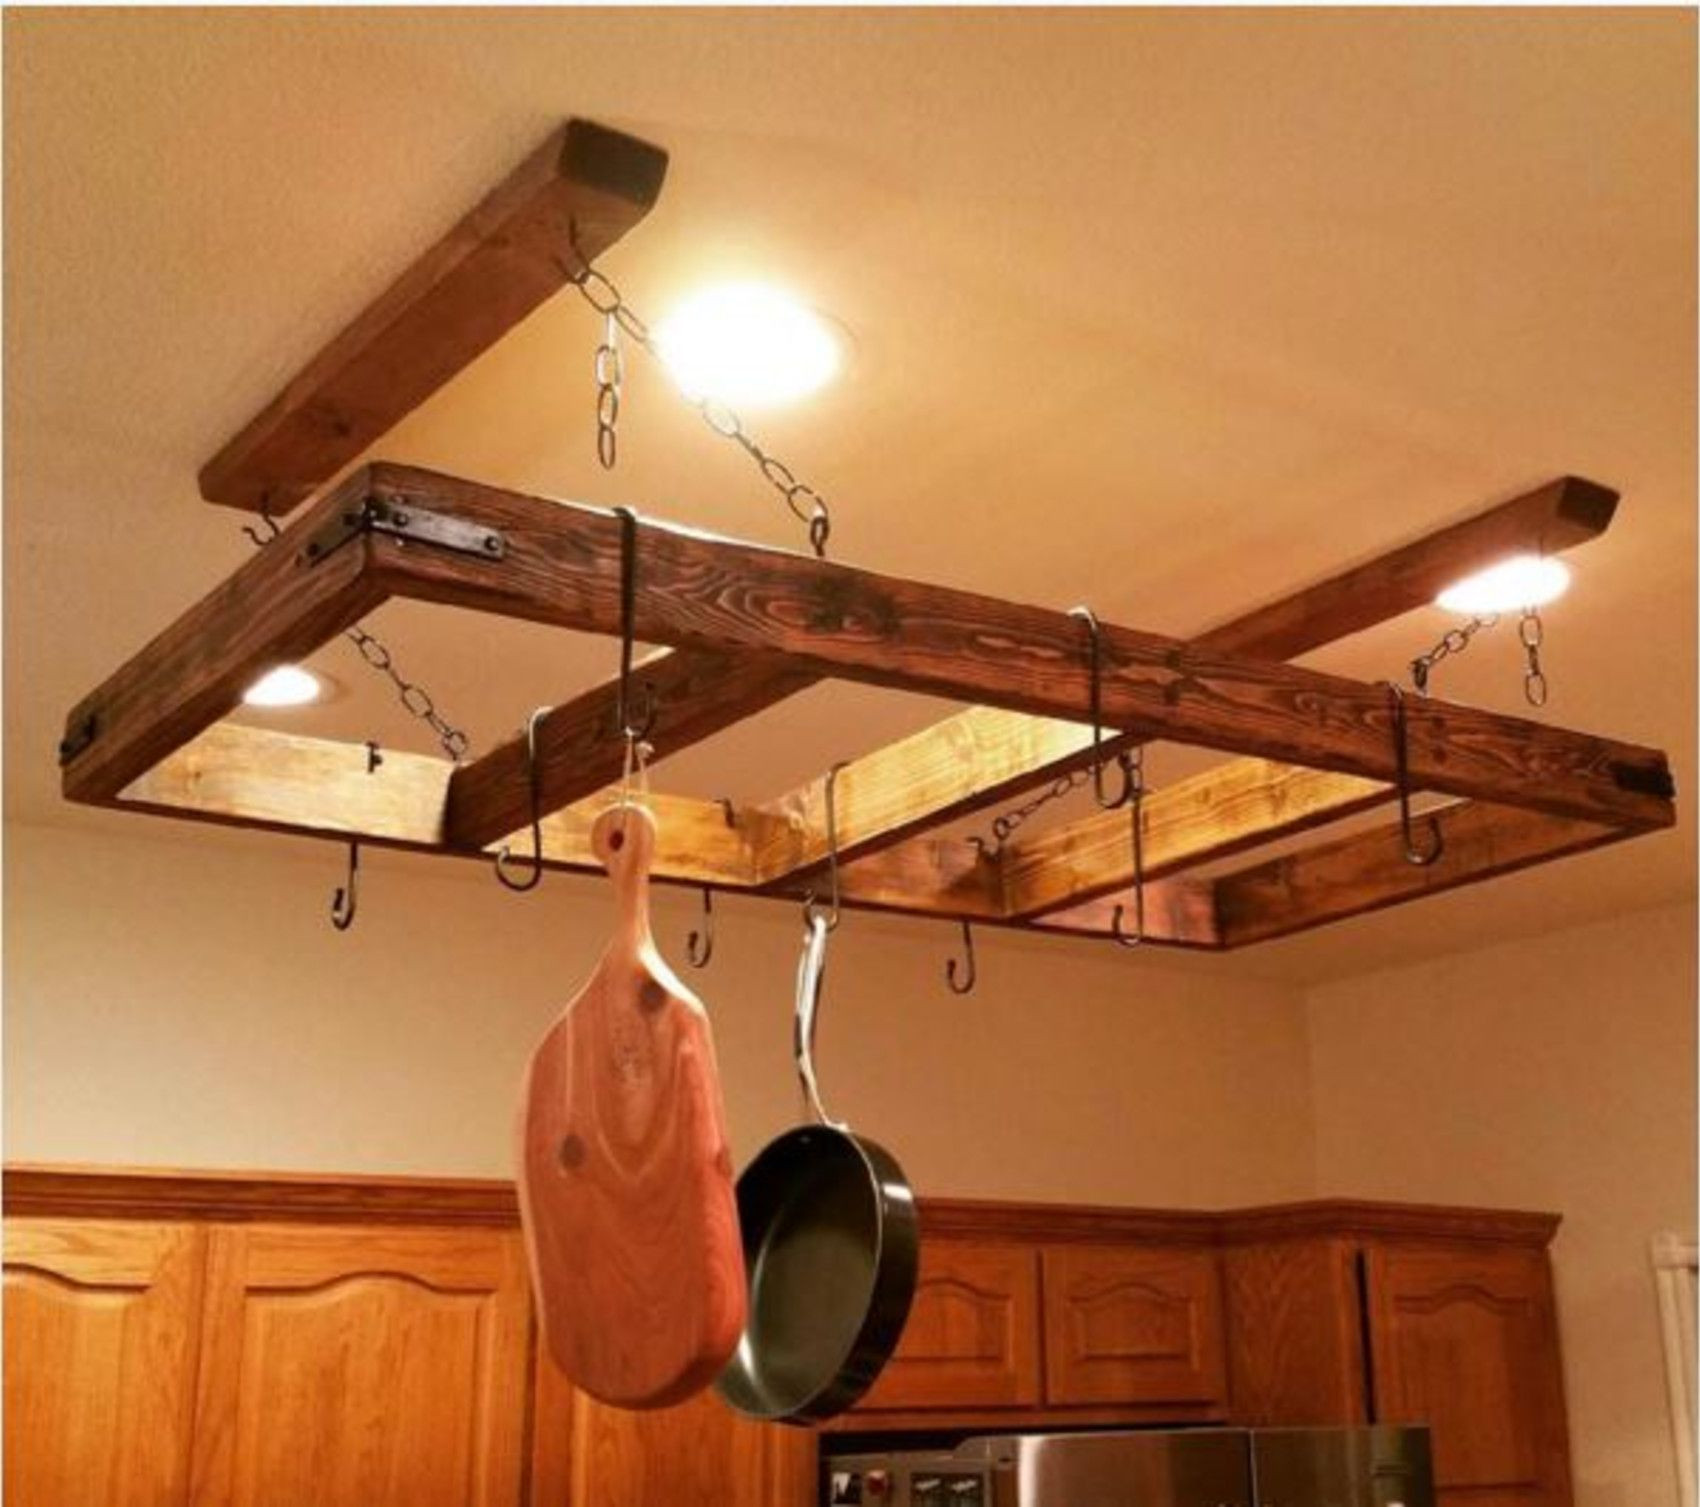 DIY Kitchen Pot Rack
 12 DIY pot rack projects to save space in your kitchen